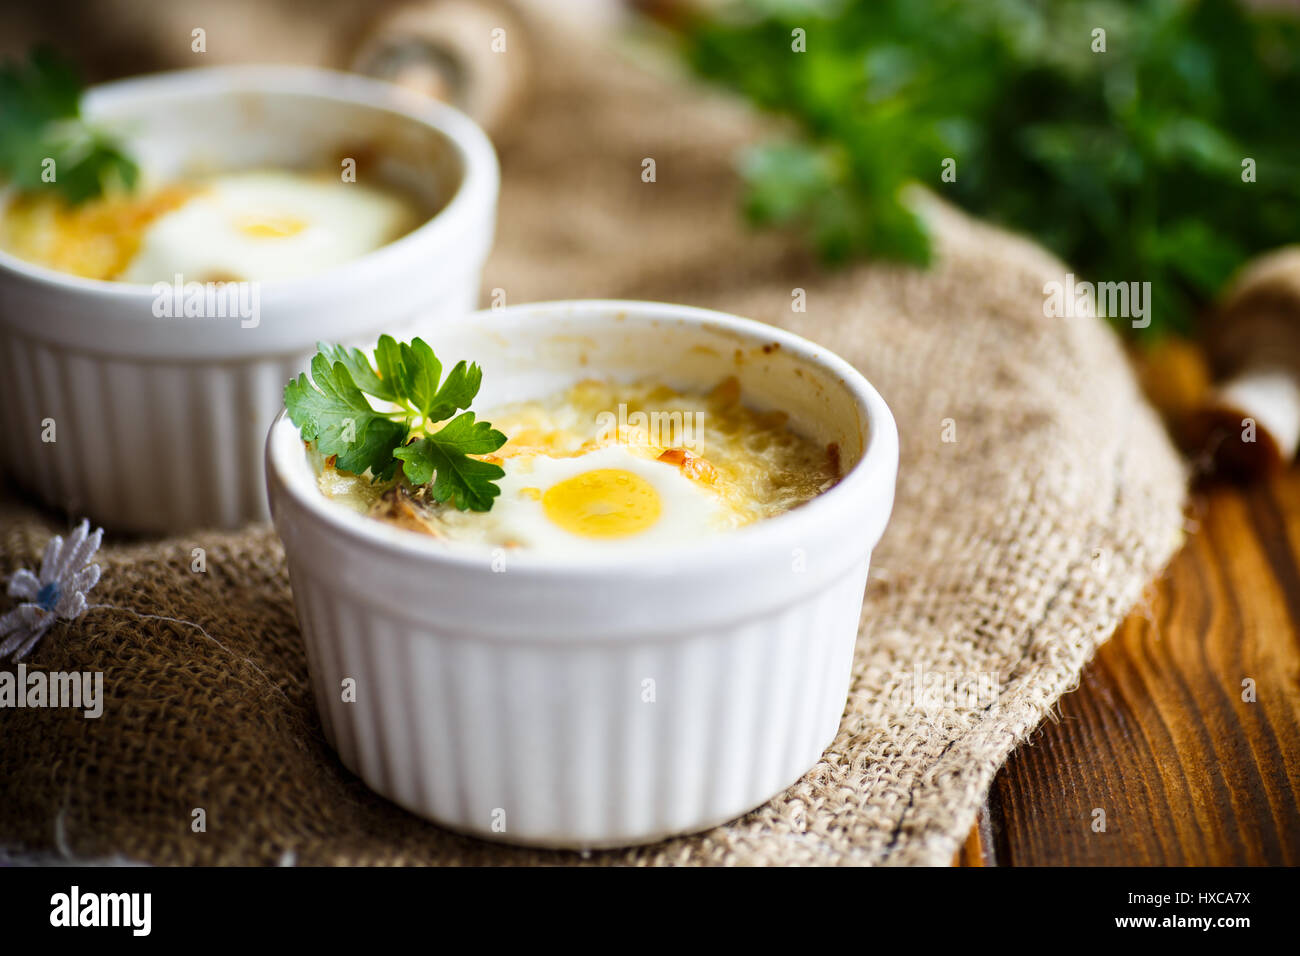 Baked egg with minced fish and mushrooms Stock Photo